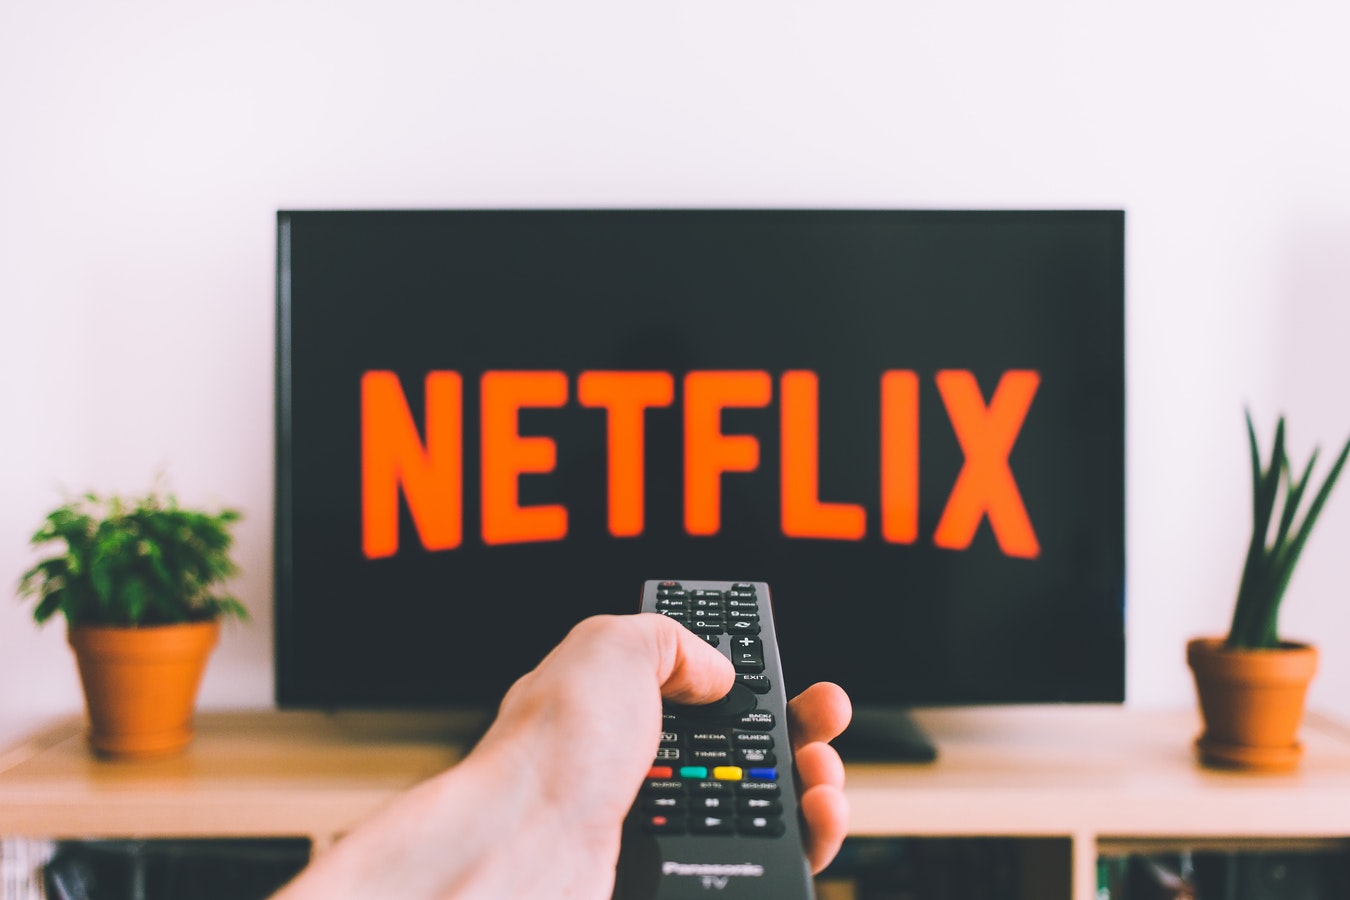 A hand reaching out with a remote pointed at a TV. On the TV is the Netflix logo.